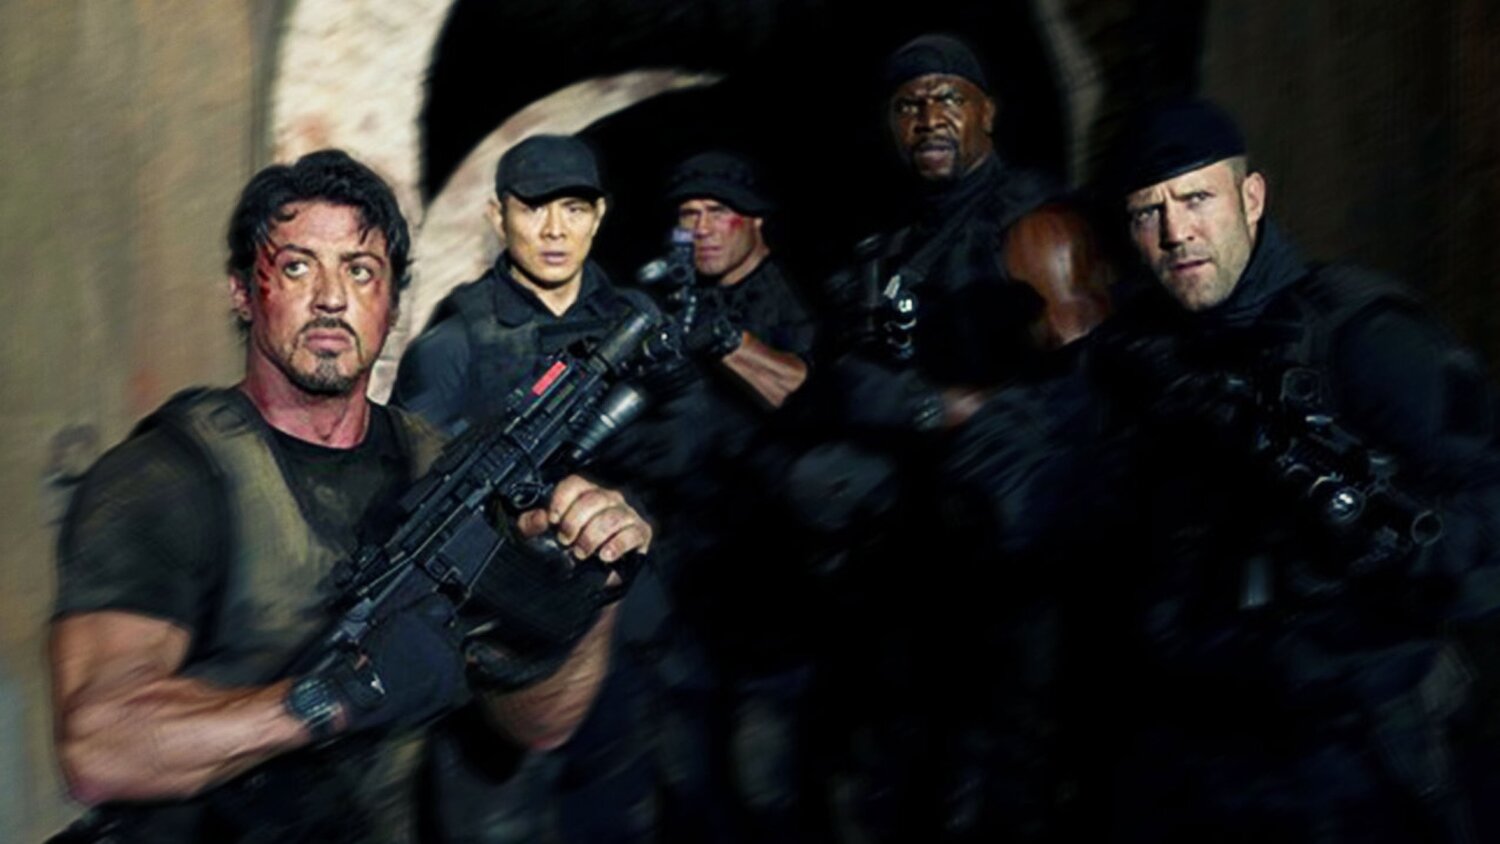 Expendables 4 the The Expendables